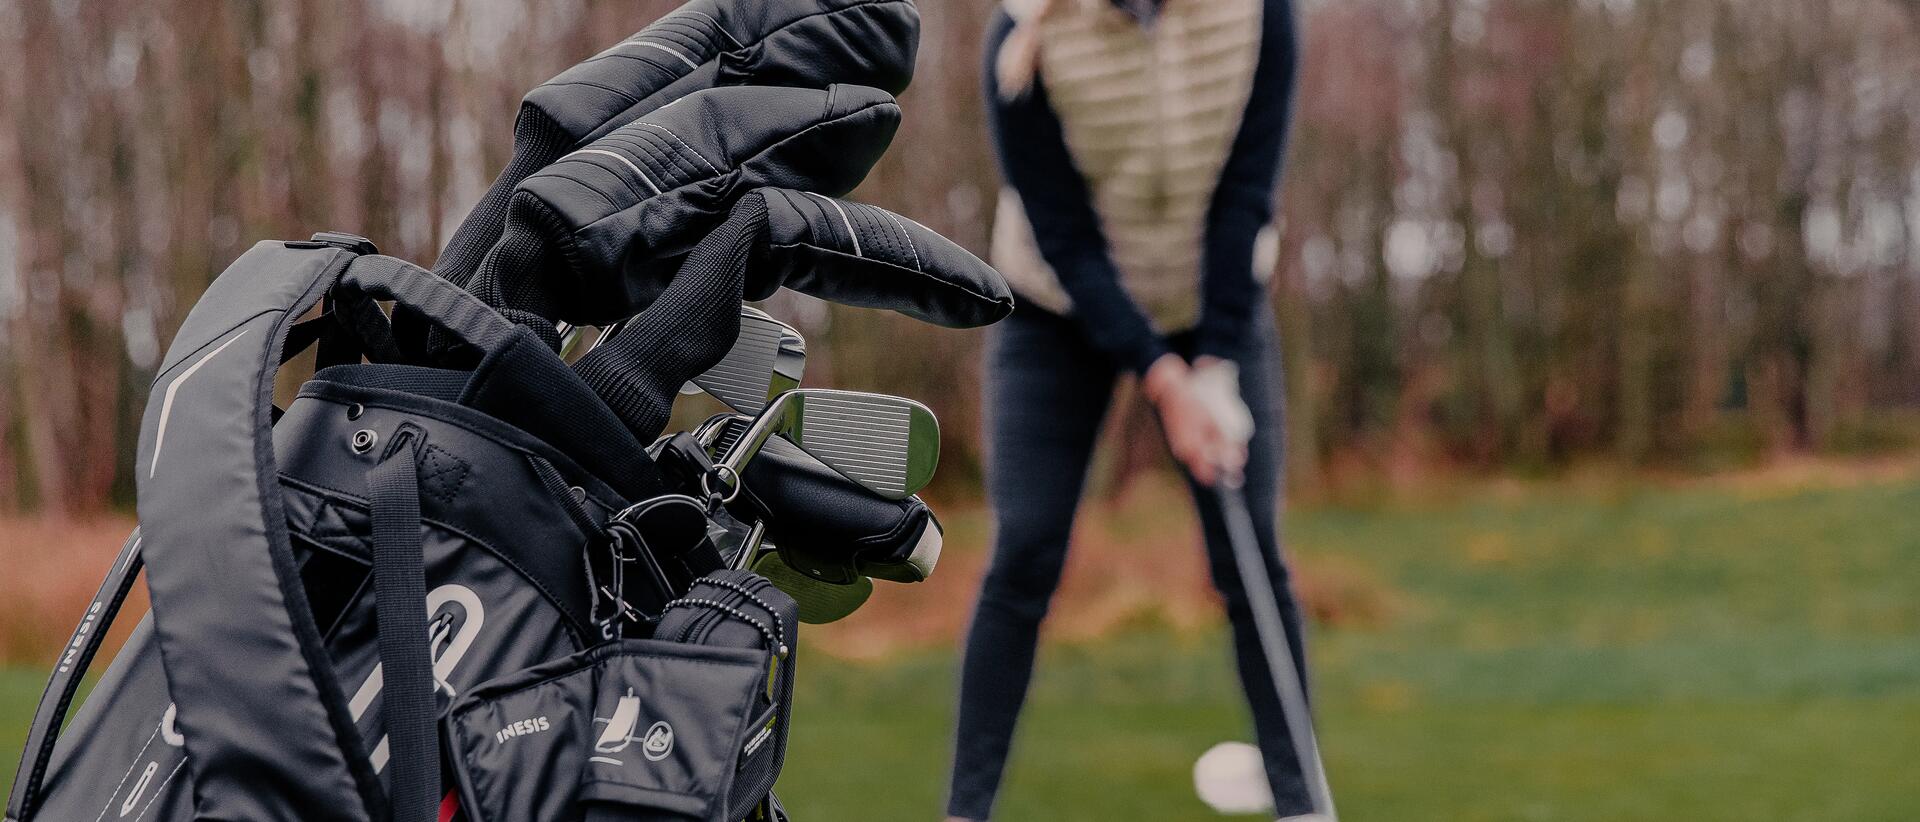 How to Choose your Golf Clubs